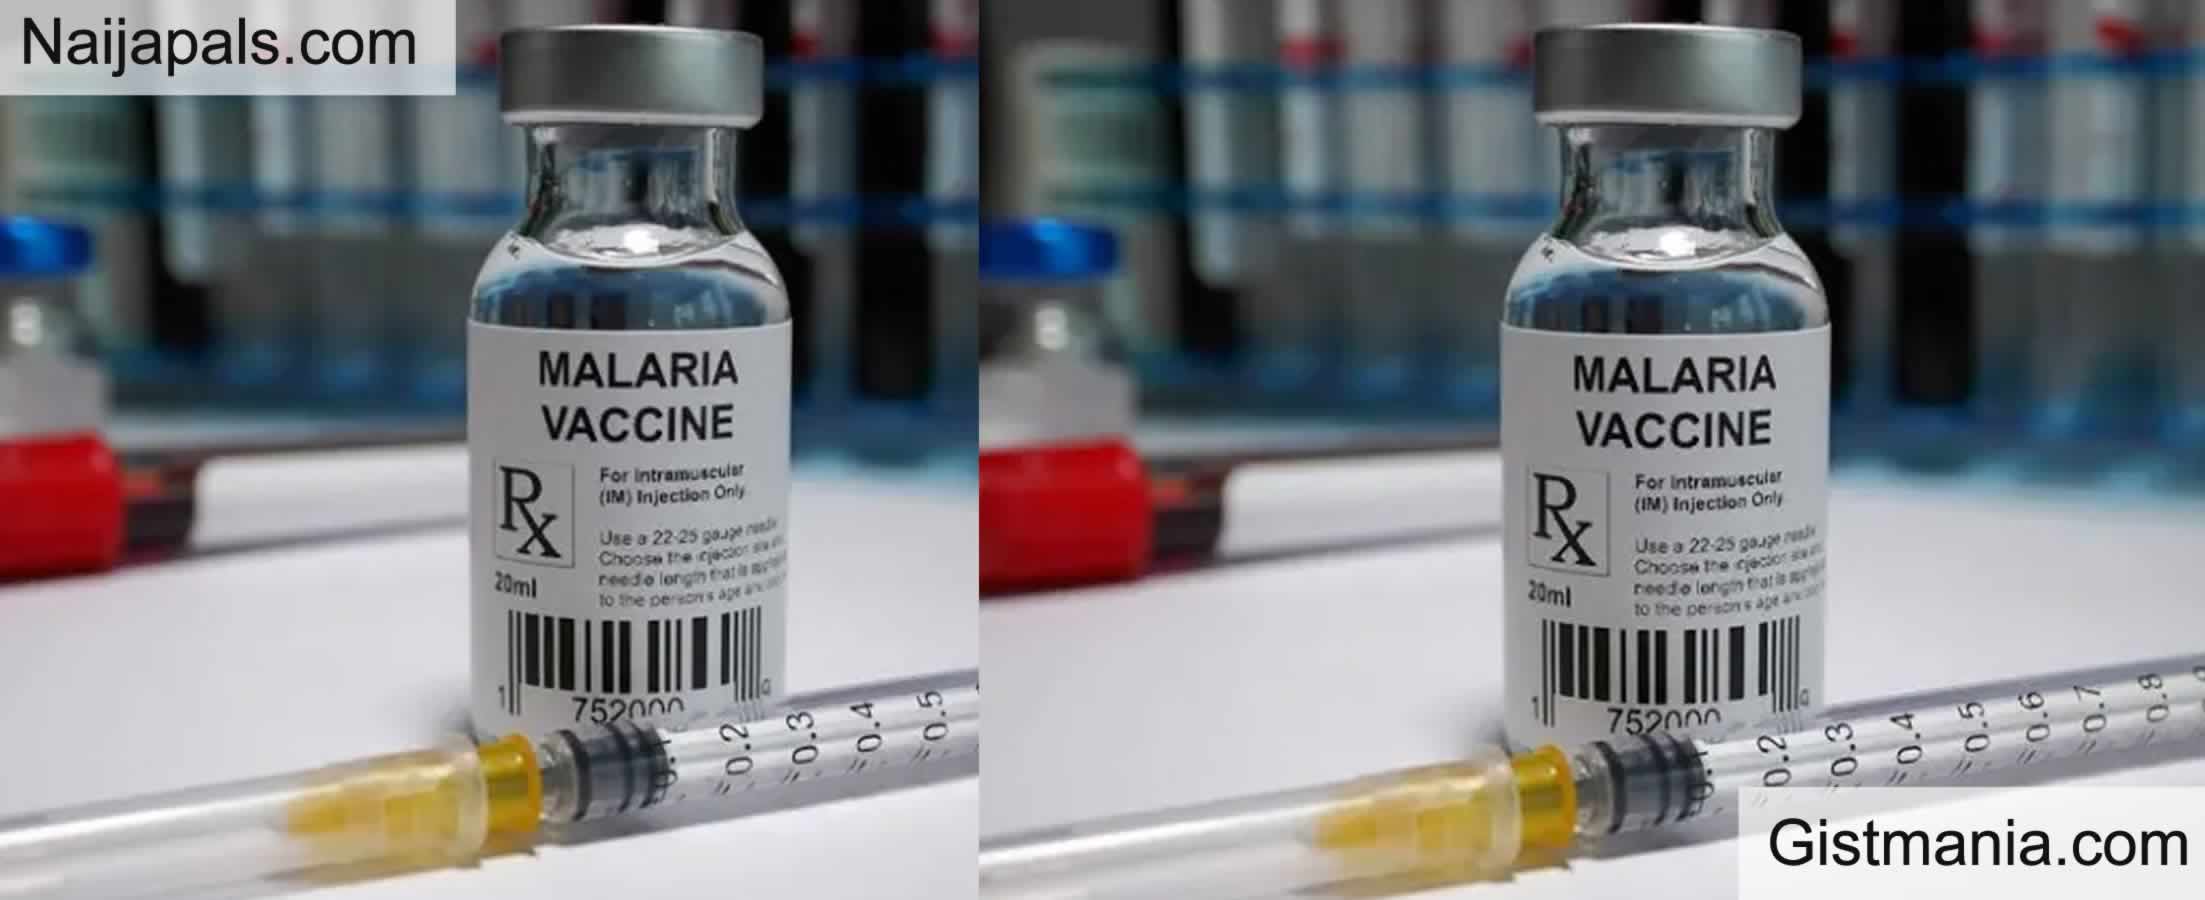 Nigeria Becomes 2nd Country In The World To Approve R21 Malaria Vaccine